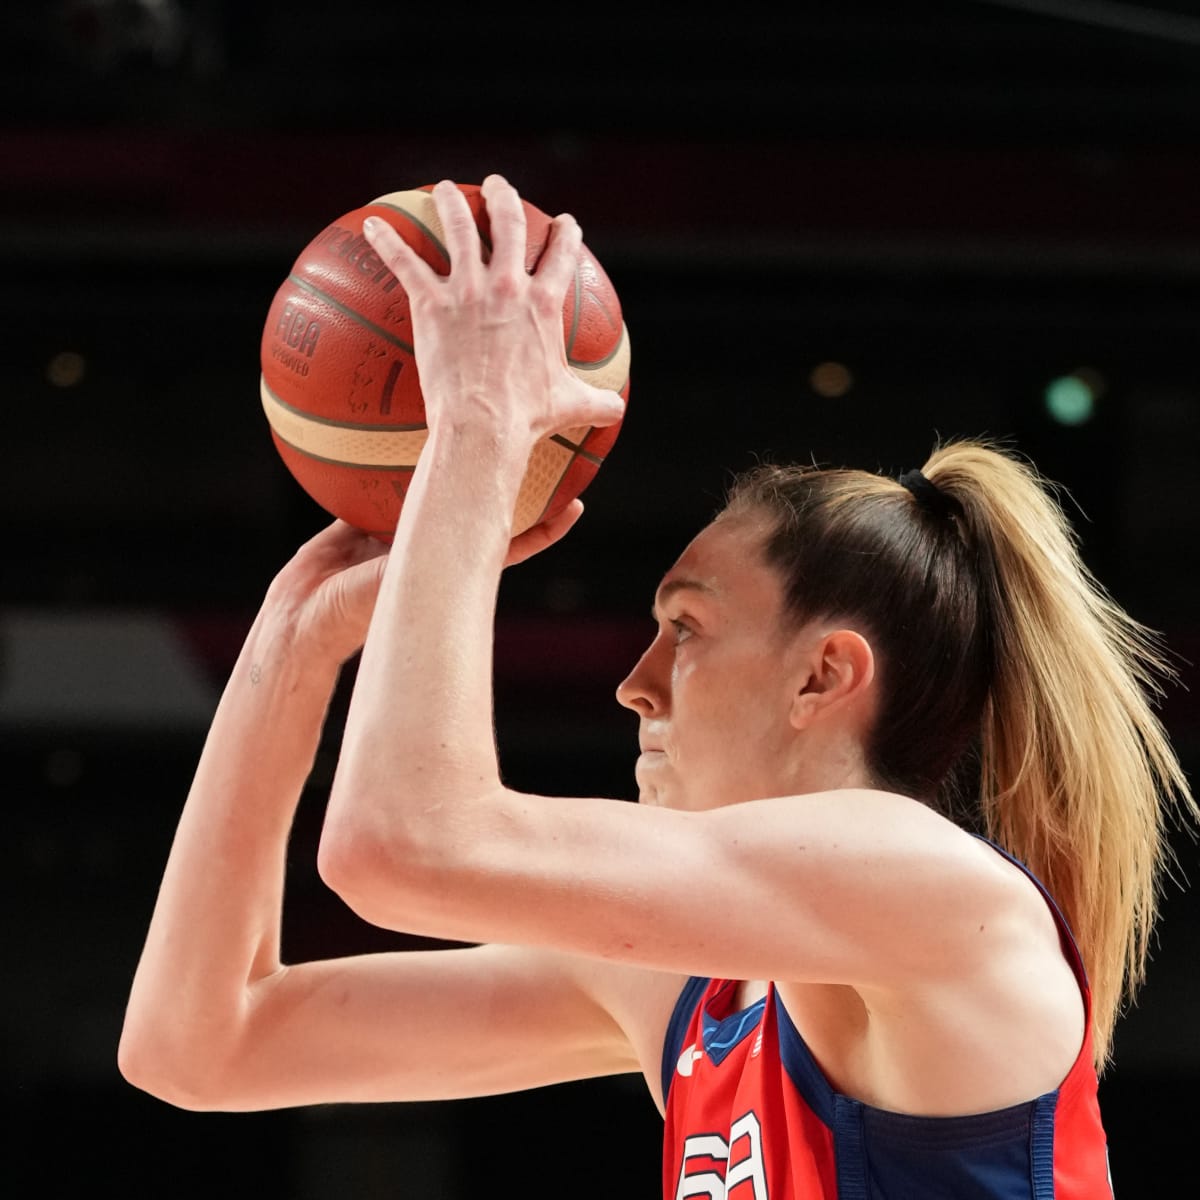 Fantasy women's basketball: What to expect from new-look Los